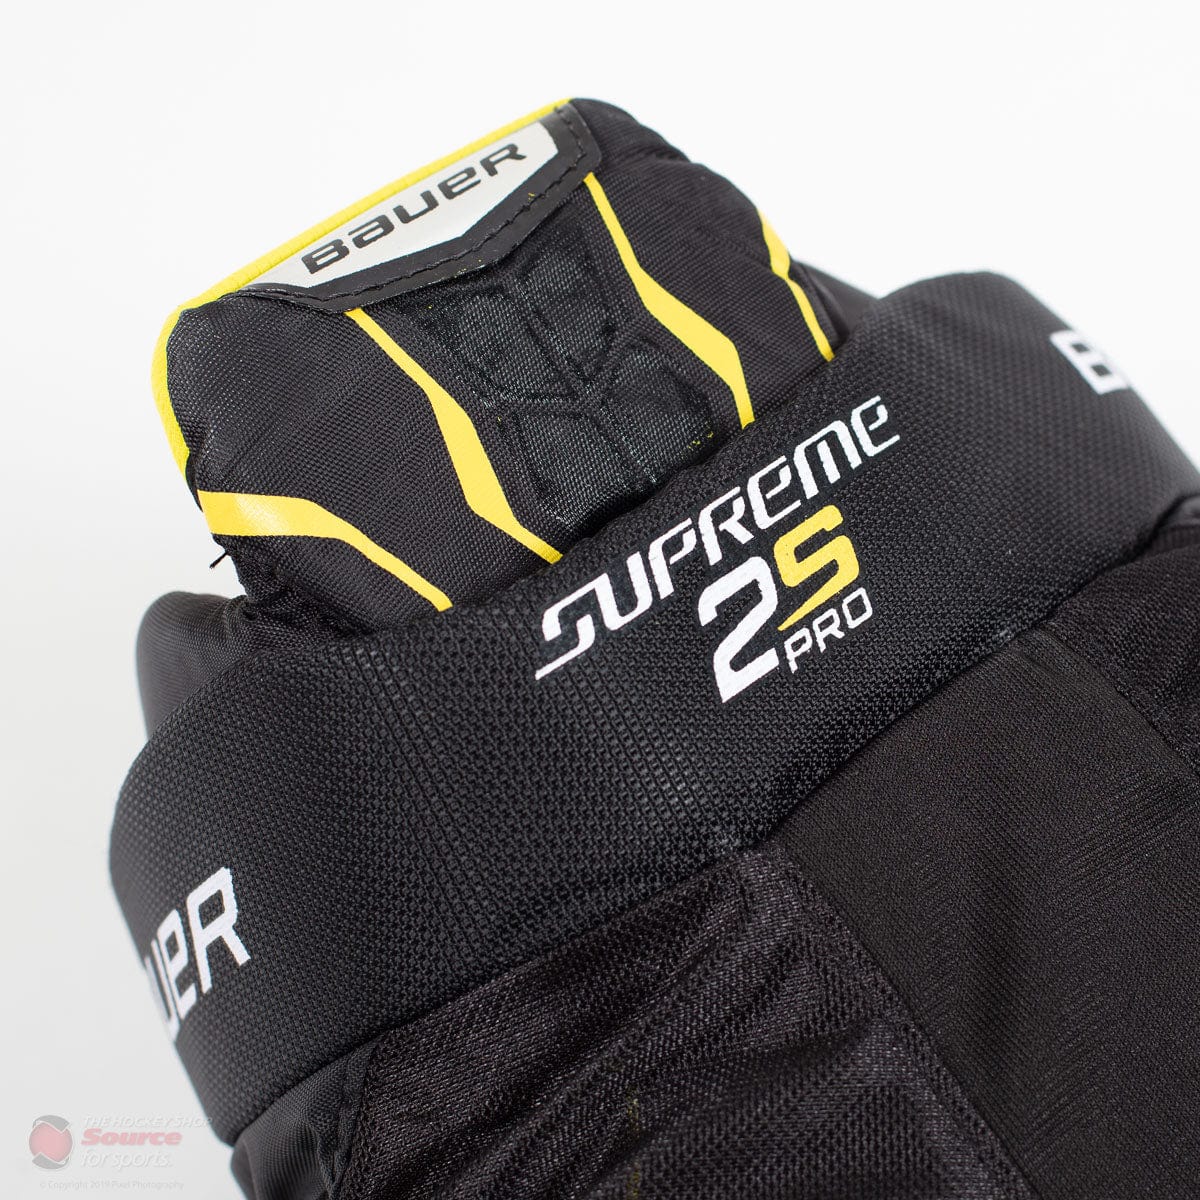 Bauer Supreme 2S Pro Youth Hockey Pants